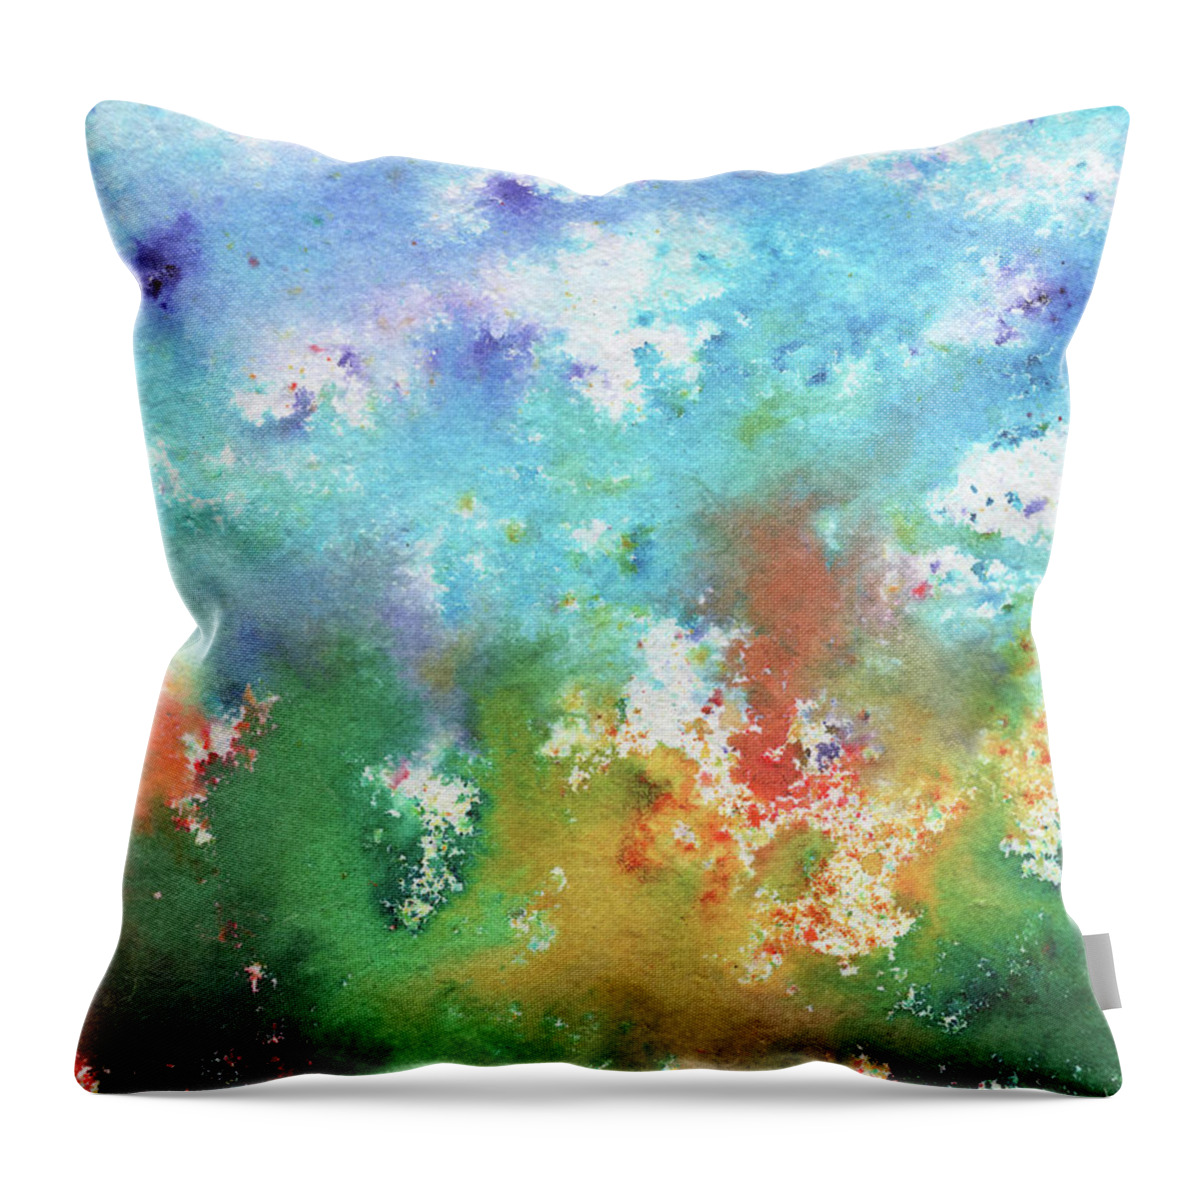 Abstract Watercolor Throw Pillow featuring the painting Abstract Watercolor Splashes Organic Natural Happy Colors Art I by Irina Sztukowski